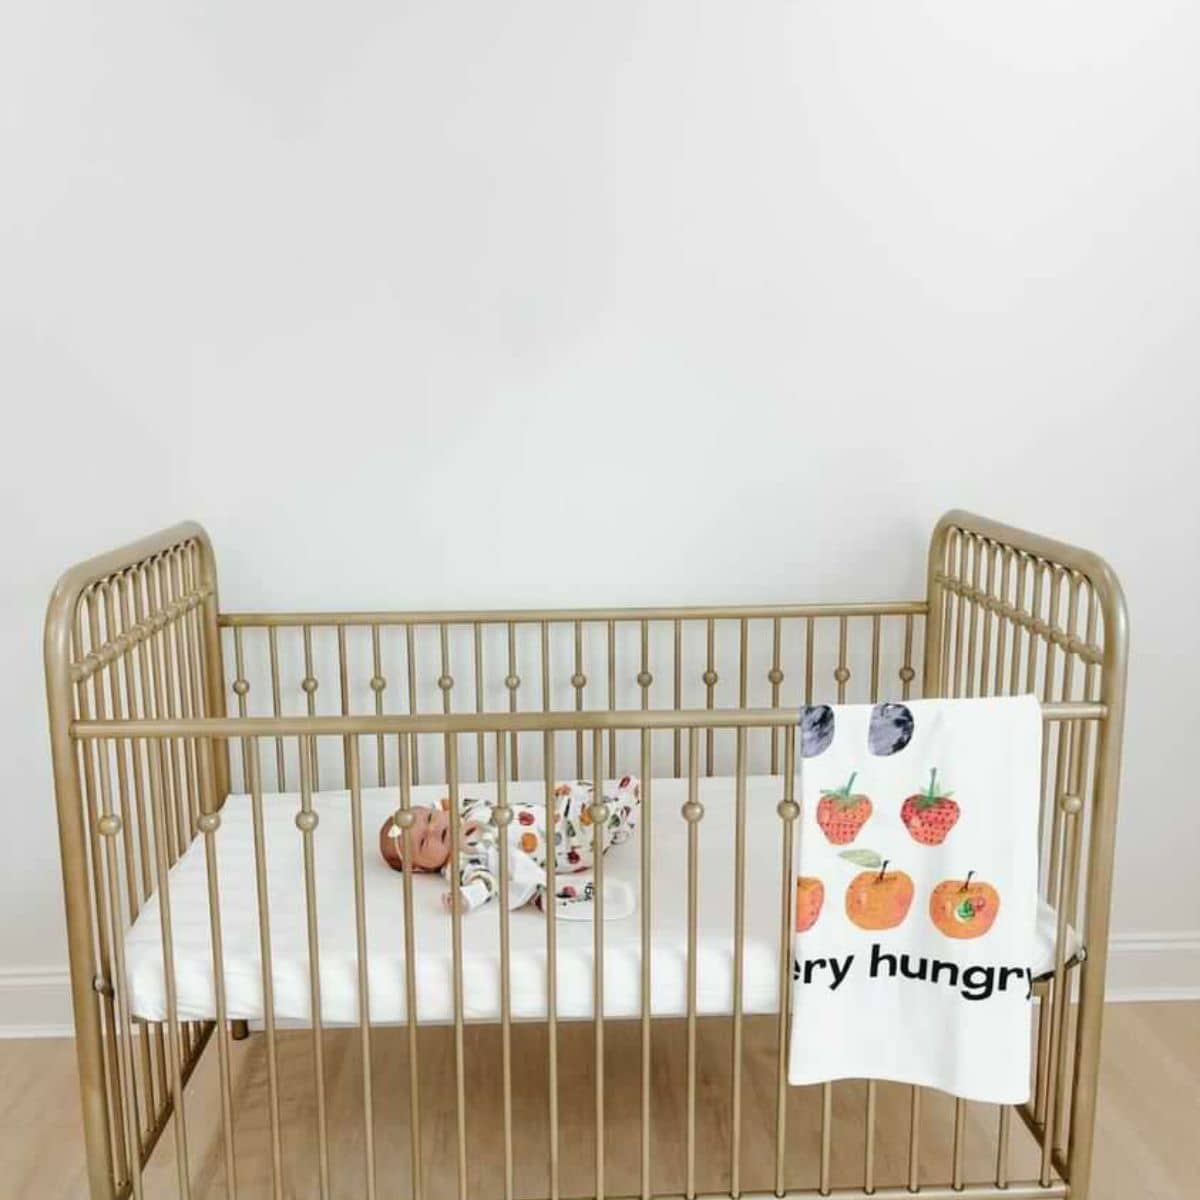 L'ovedbaby x The Very Hungry Caterpillar Organic Blanket - Very Hungry